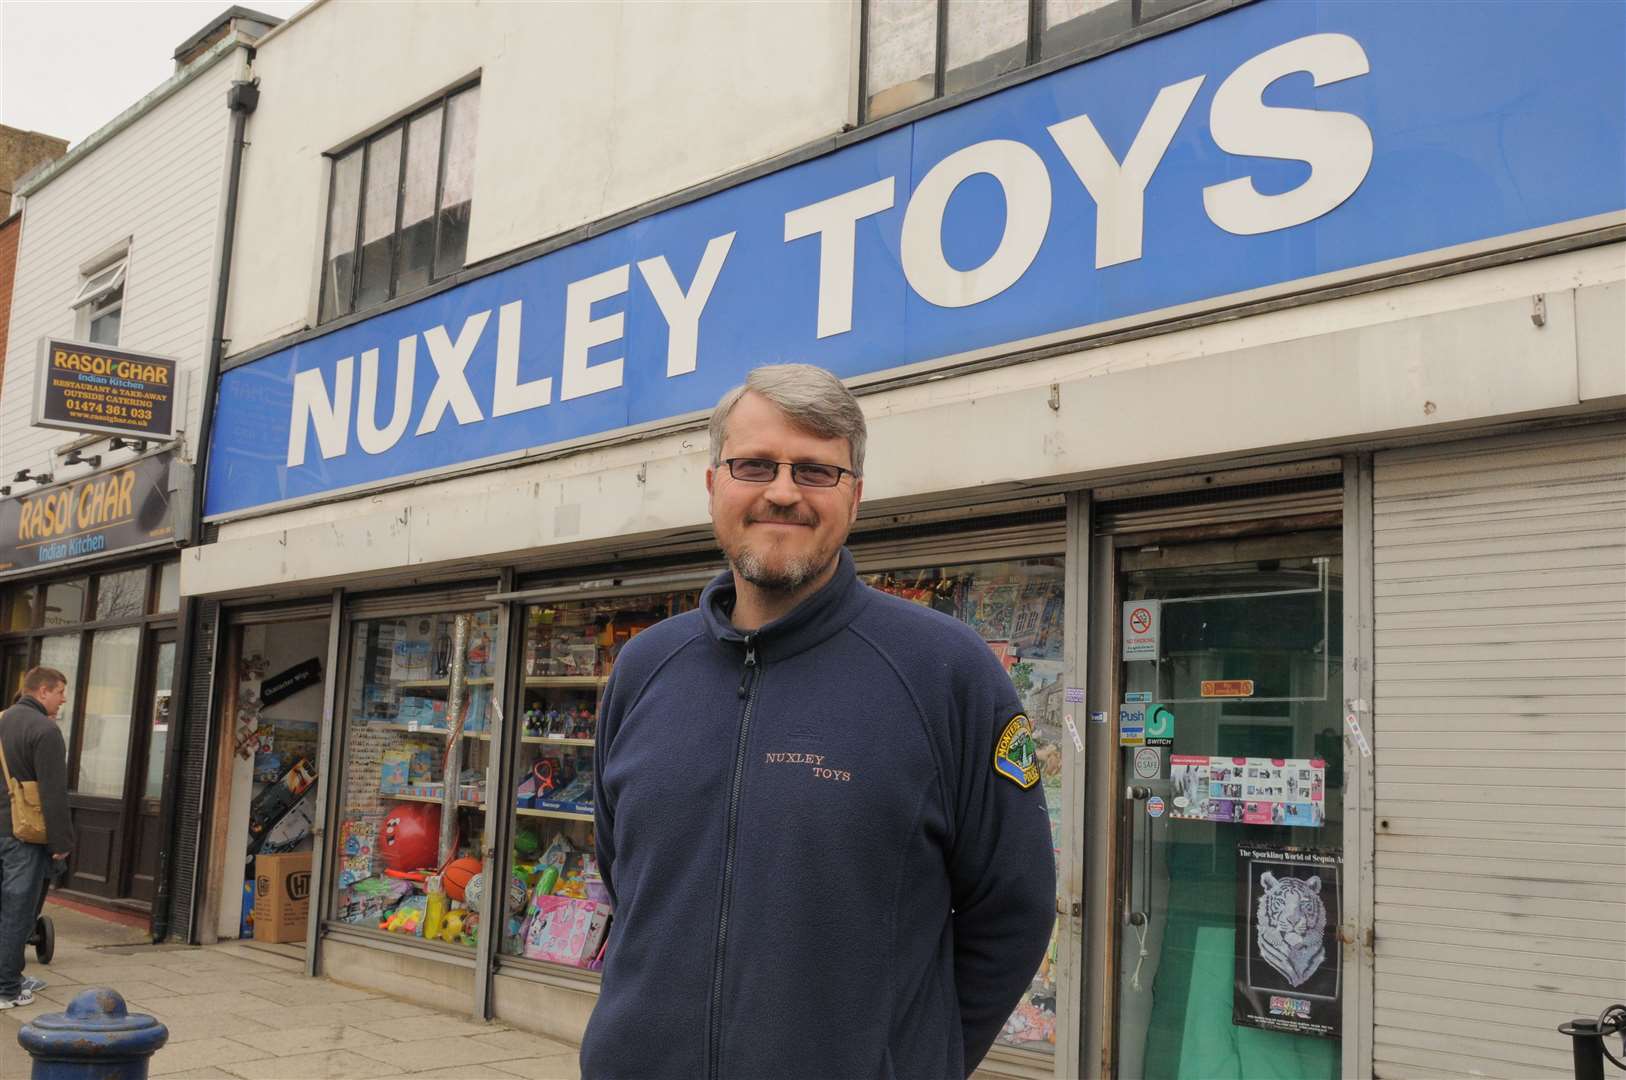 Richard Ray from Nuxley Toys. Picture: Steve Crispe